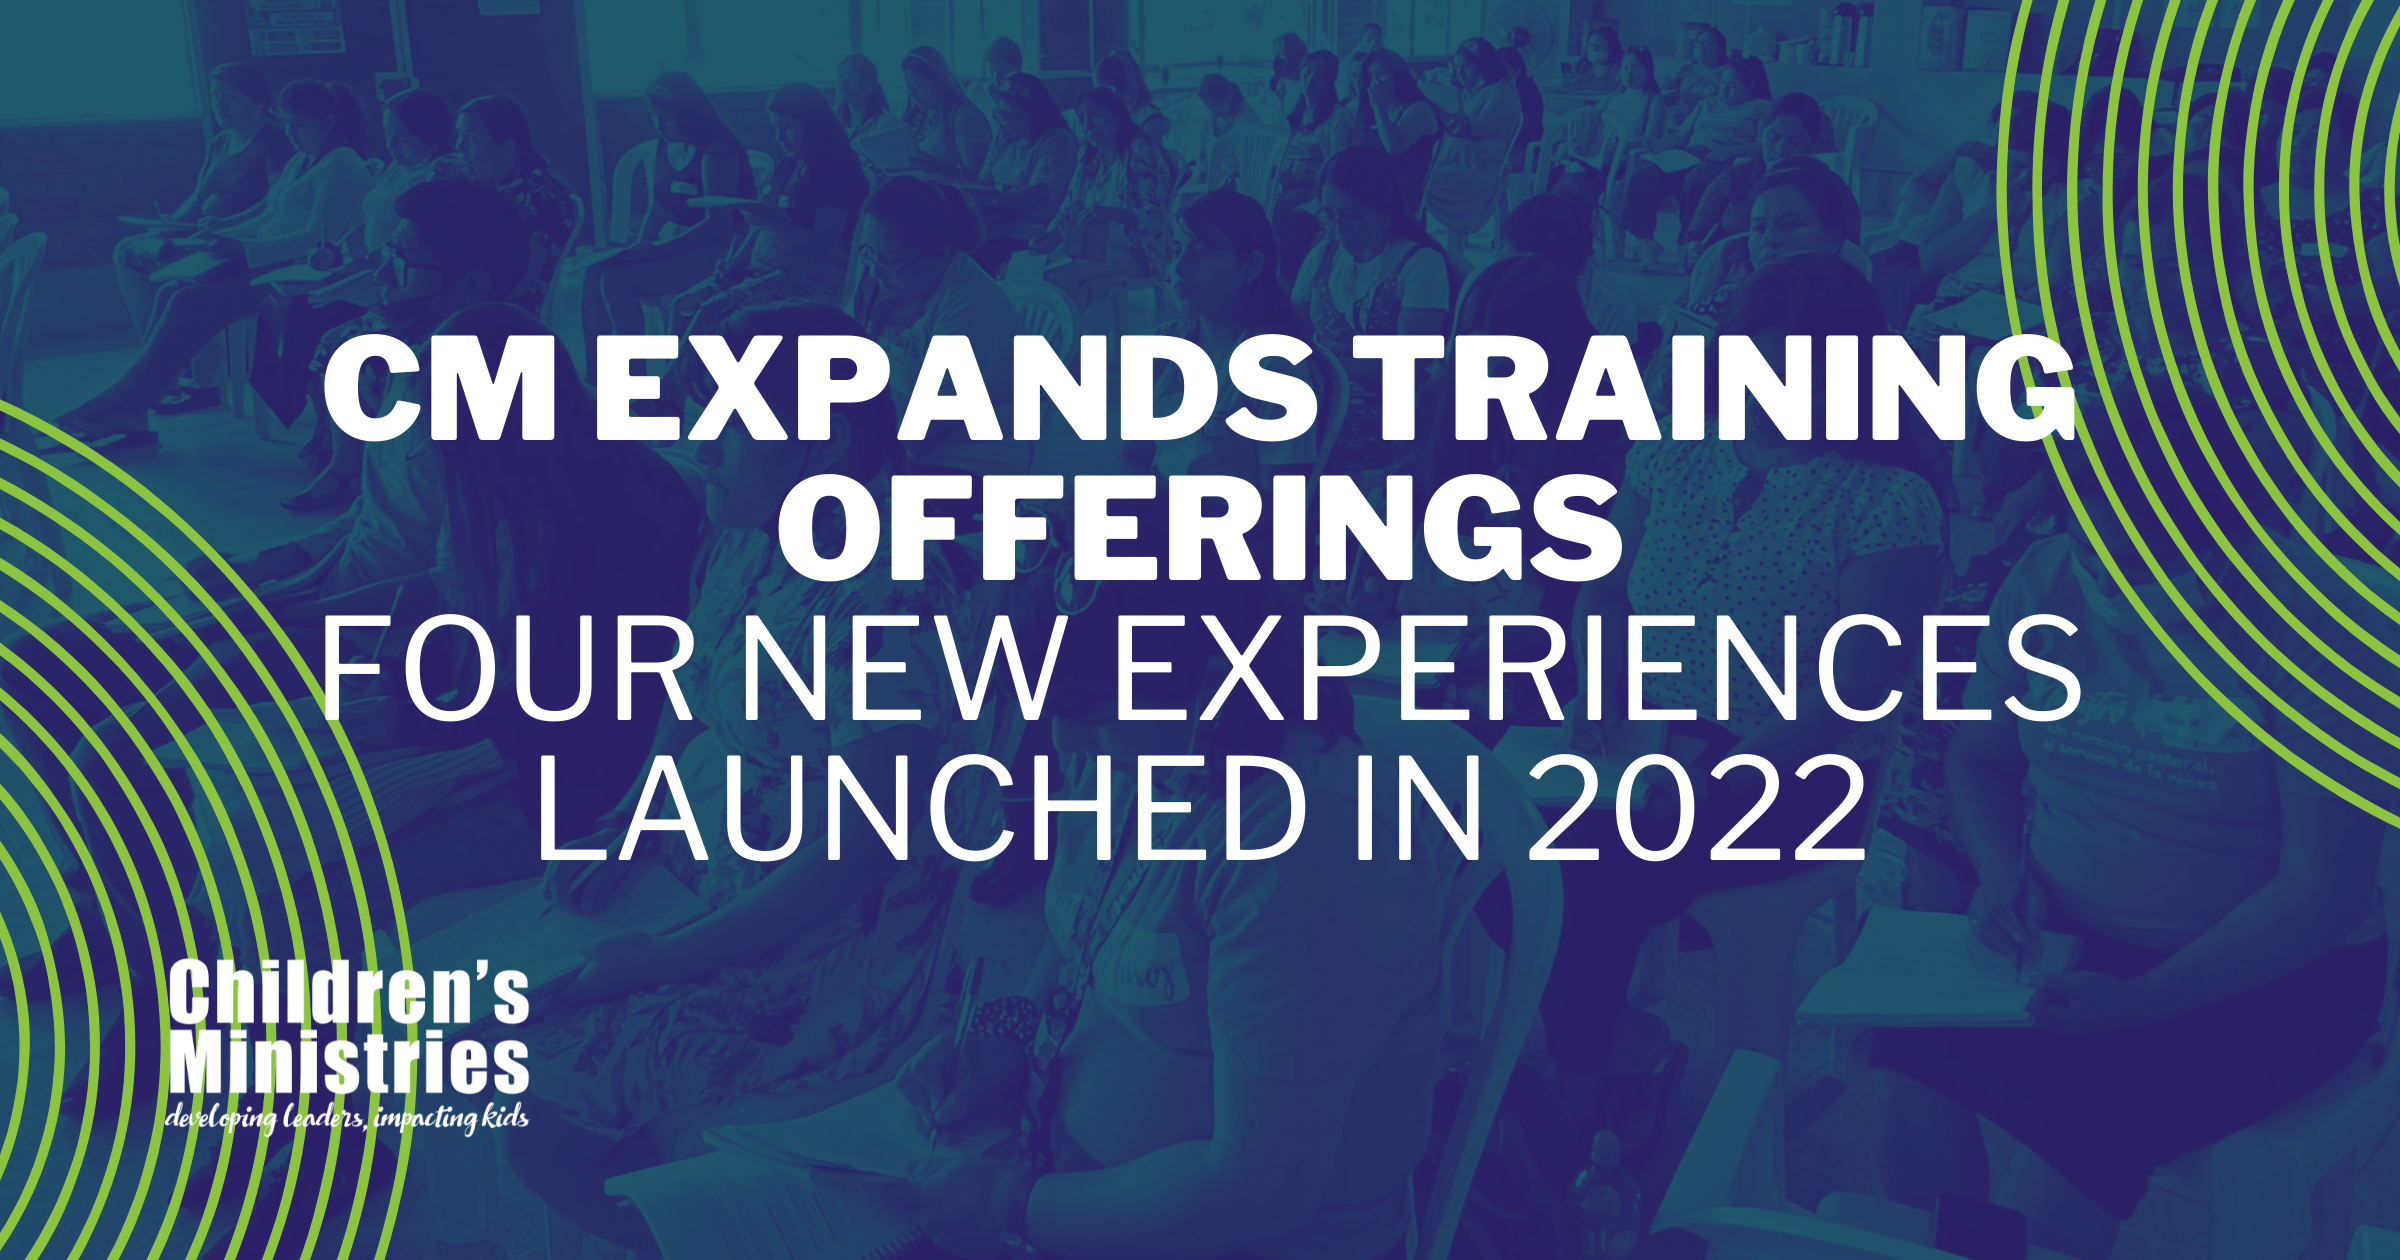 CM Expands Training Offerings: Four New Experiences Launched in 2022